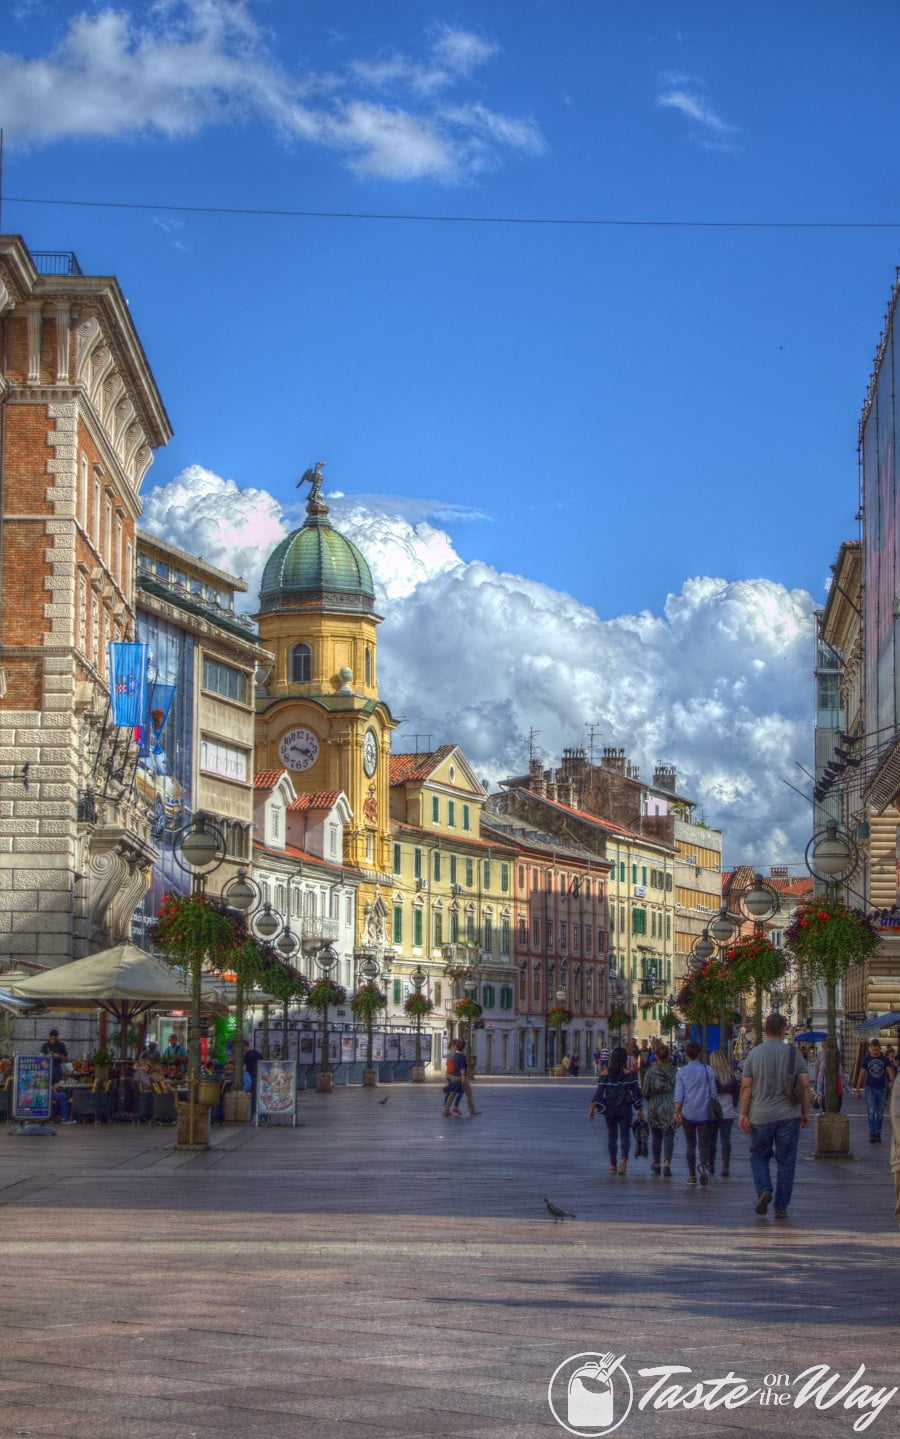 One of the top reason on why you should add #Rijeka to your #Croatia #itinerary is the postcard worthy Clock Tower. Check out for more! #travel #photography @tasteontheway